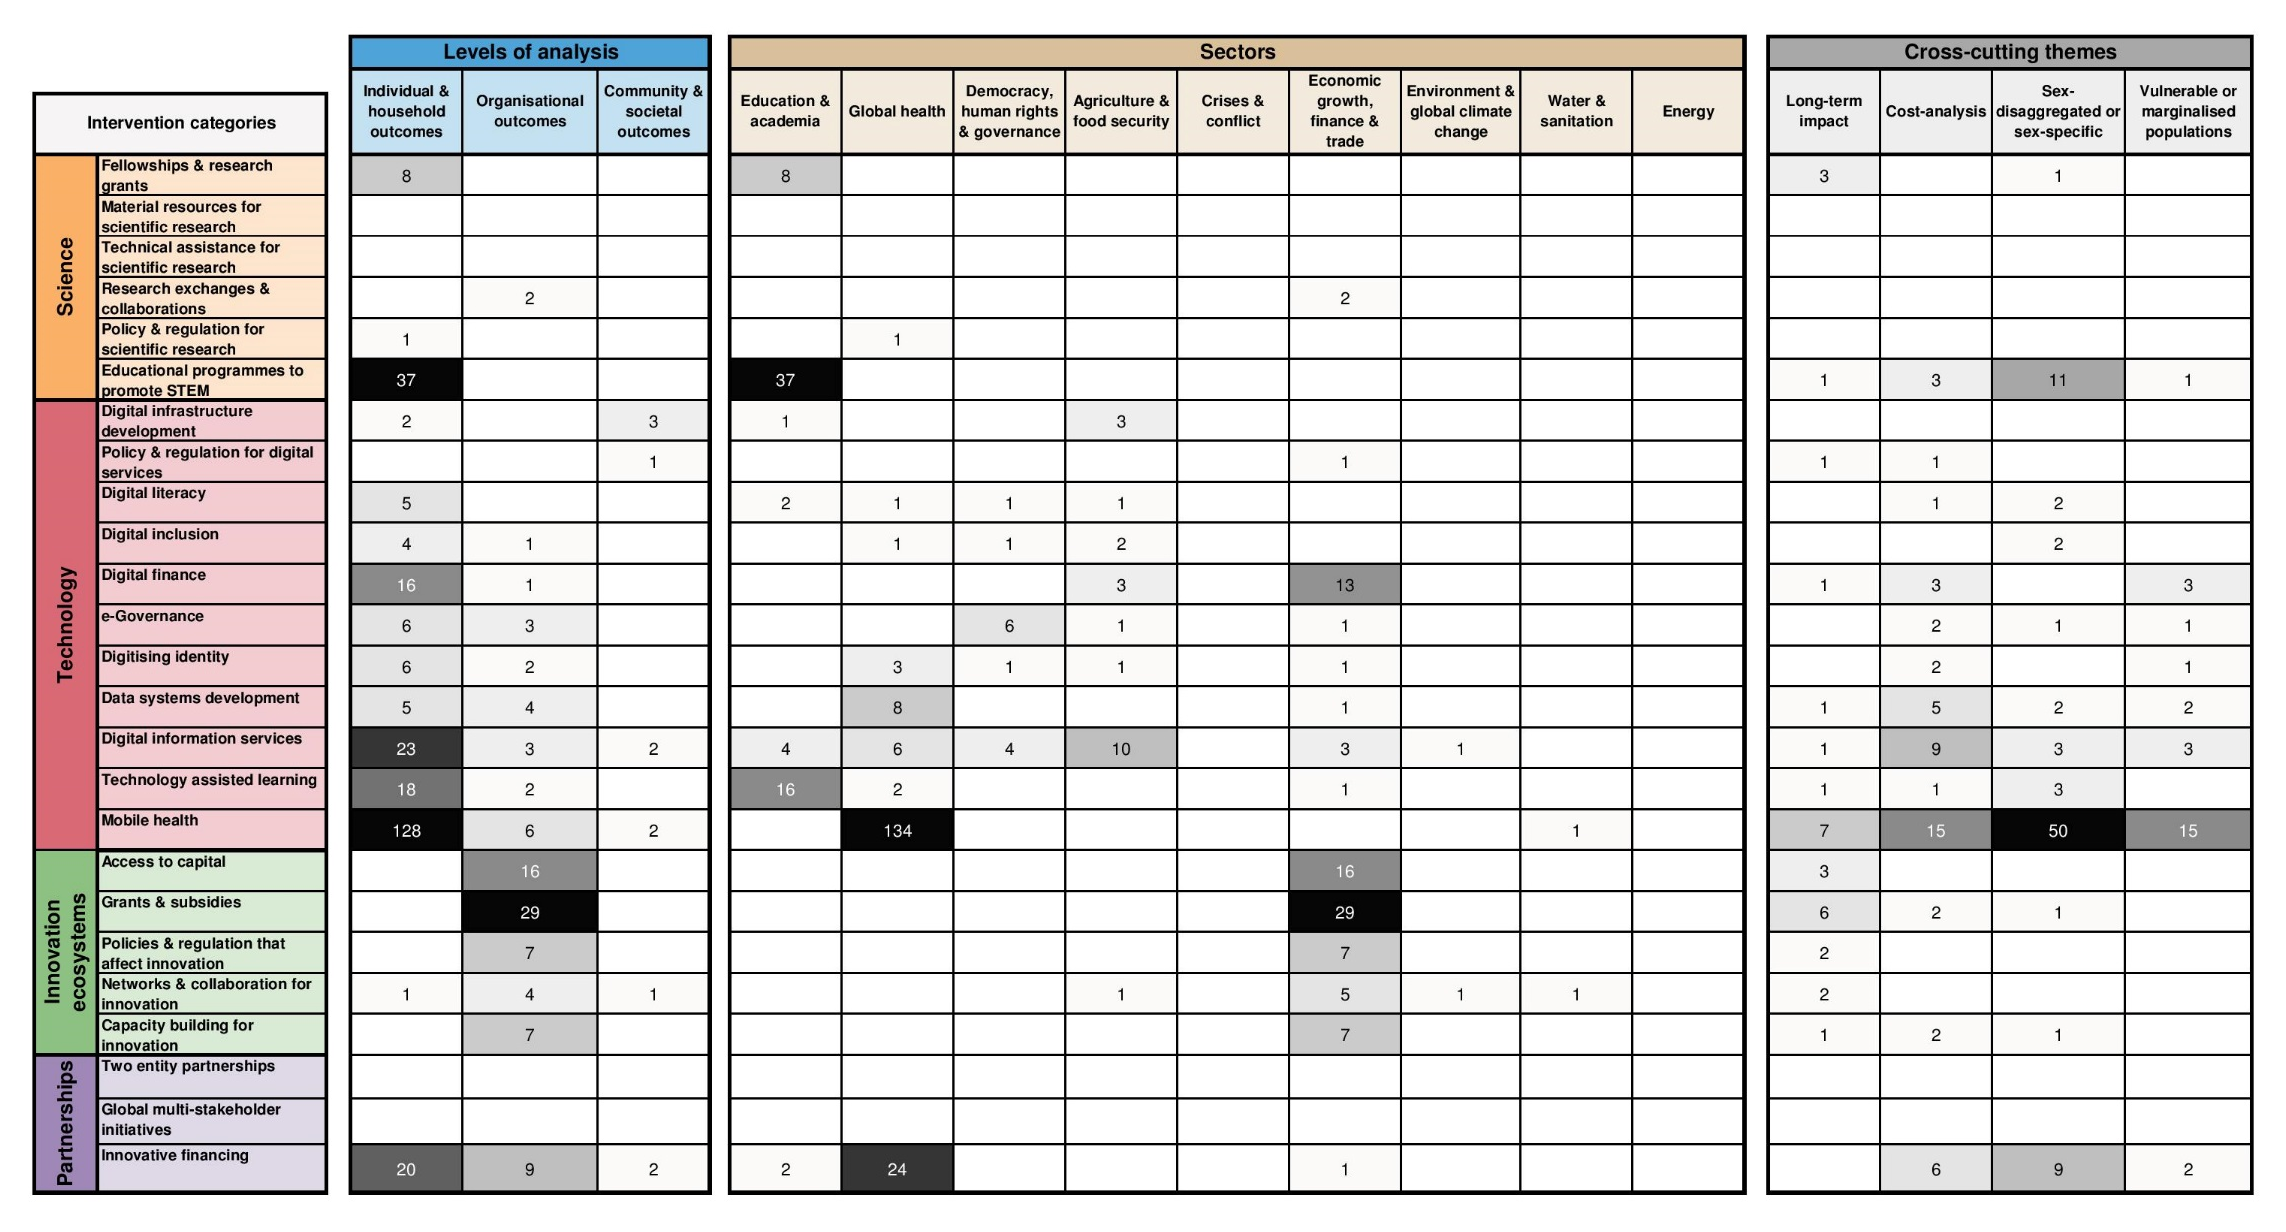 Figure 1. Evidence gap map of completed STIP impact evaluations